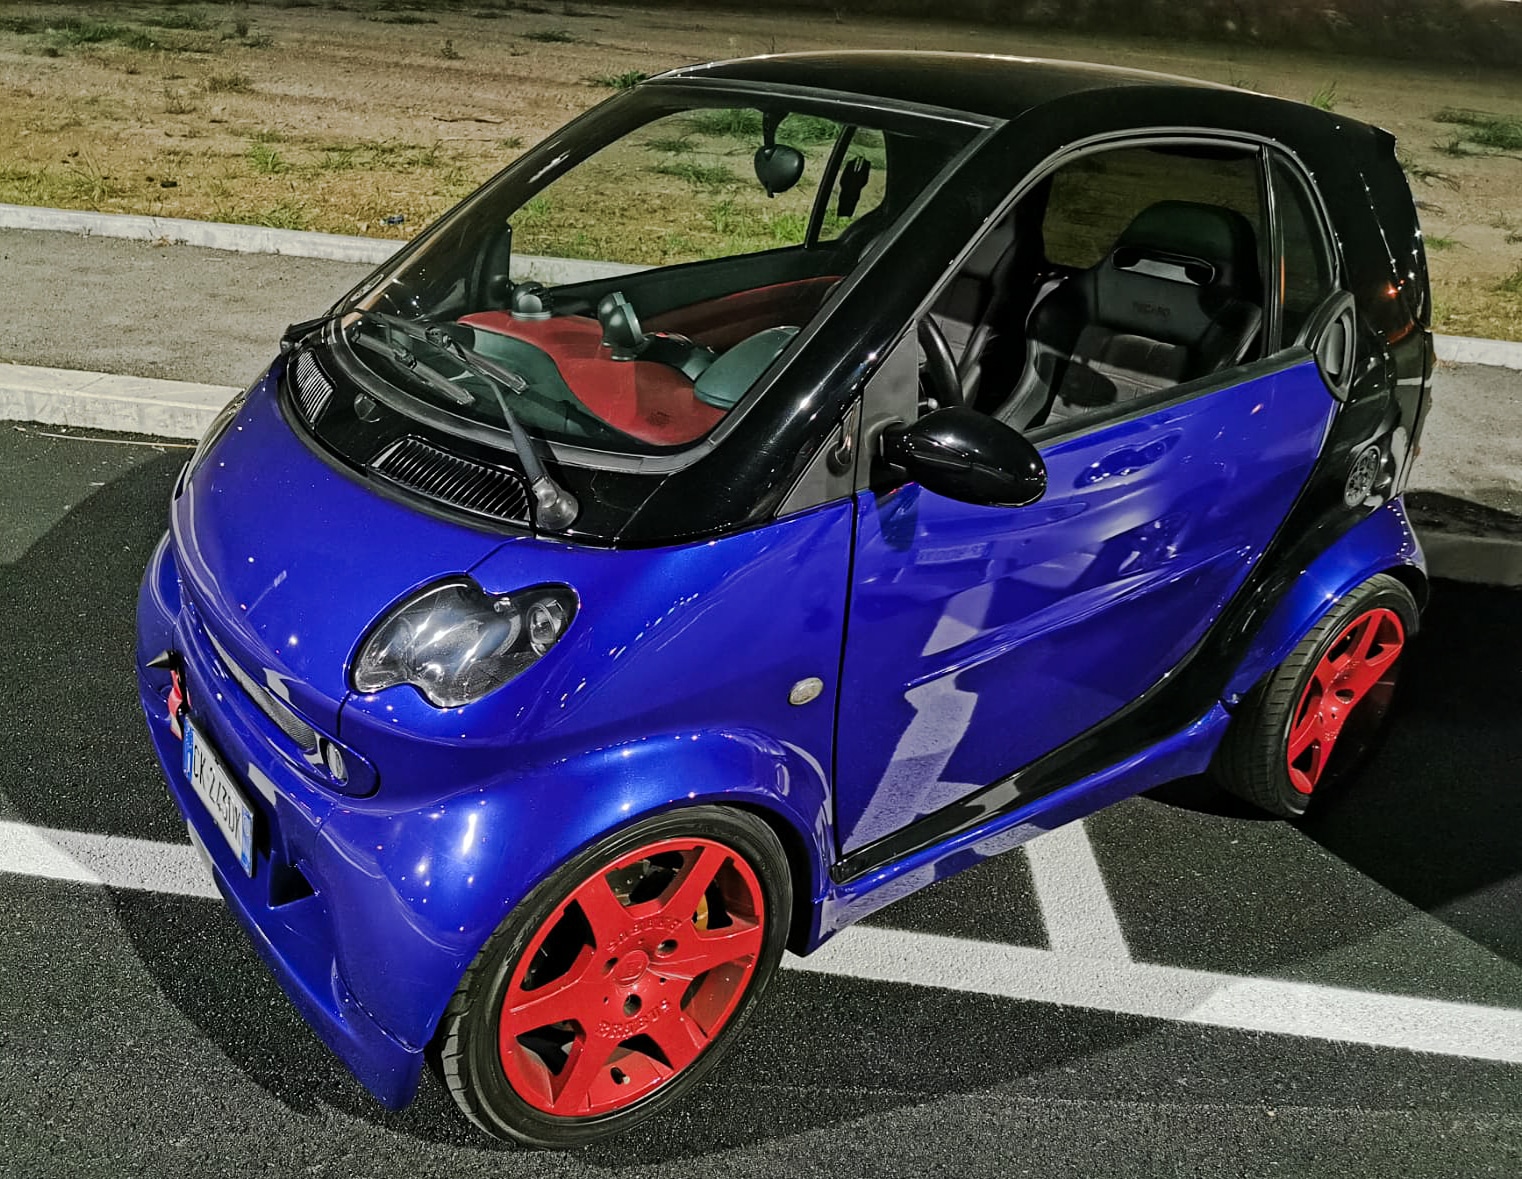 only SMART - Fotoalbum - Fortwo 450 Tuning - smart fortwo 450 tunning blc 05